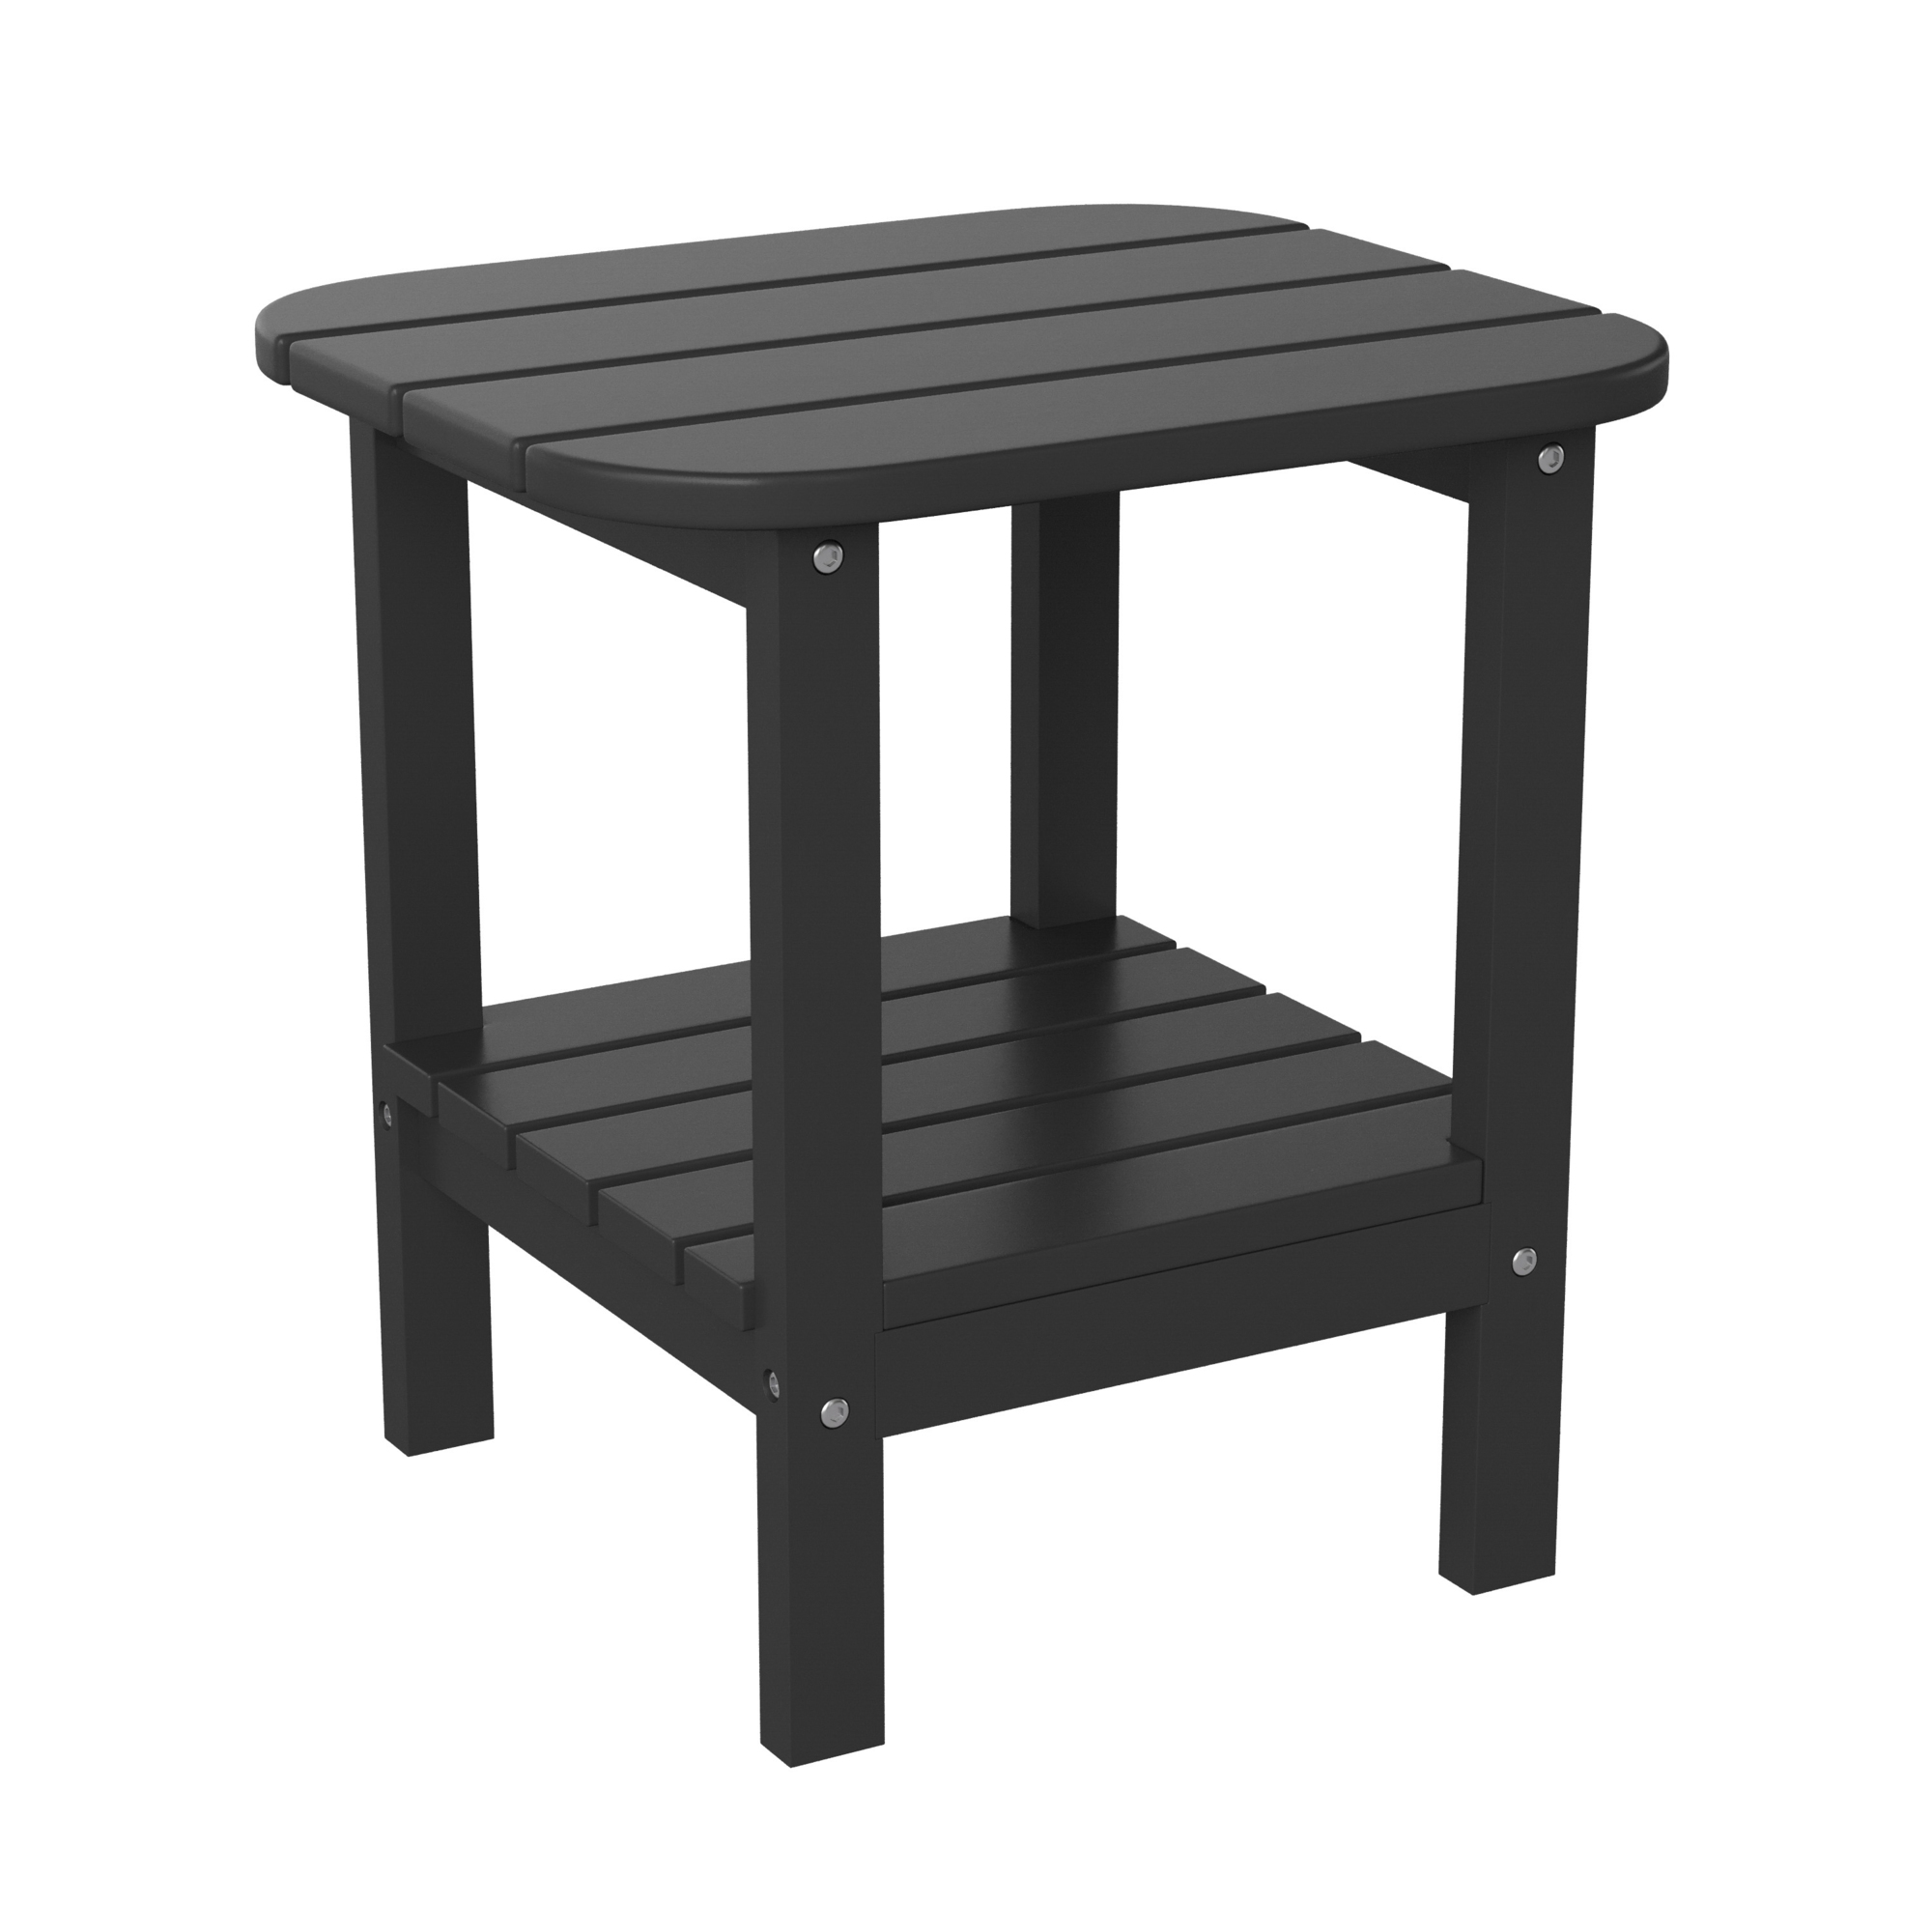 Flash Furniture, Black 2 Tier Adirondack Style Patio Side Table, Table Shape Rectangle, Primary Color Black, Height 17.75 in, Model LEHMP1351517HBK